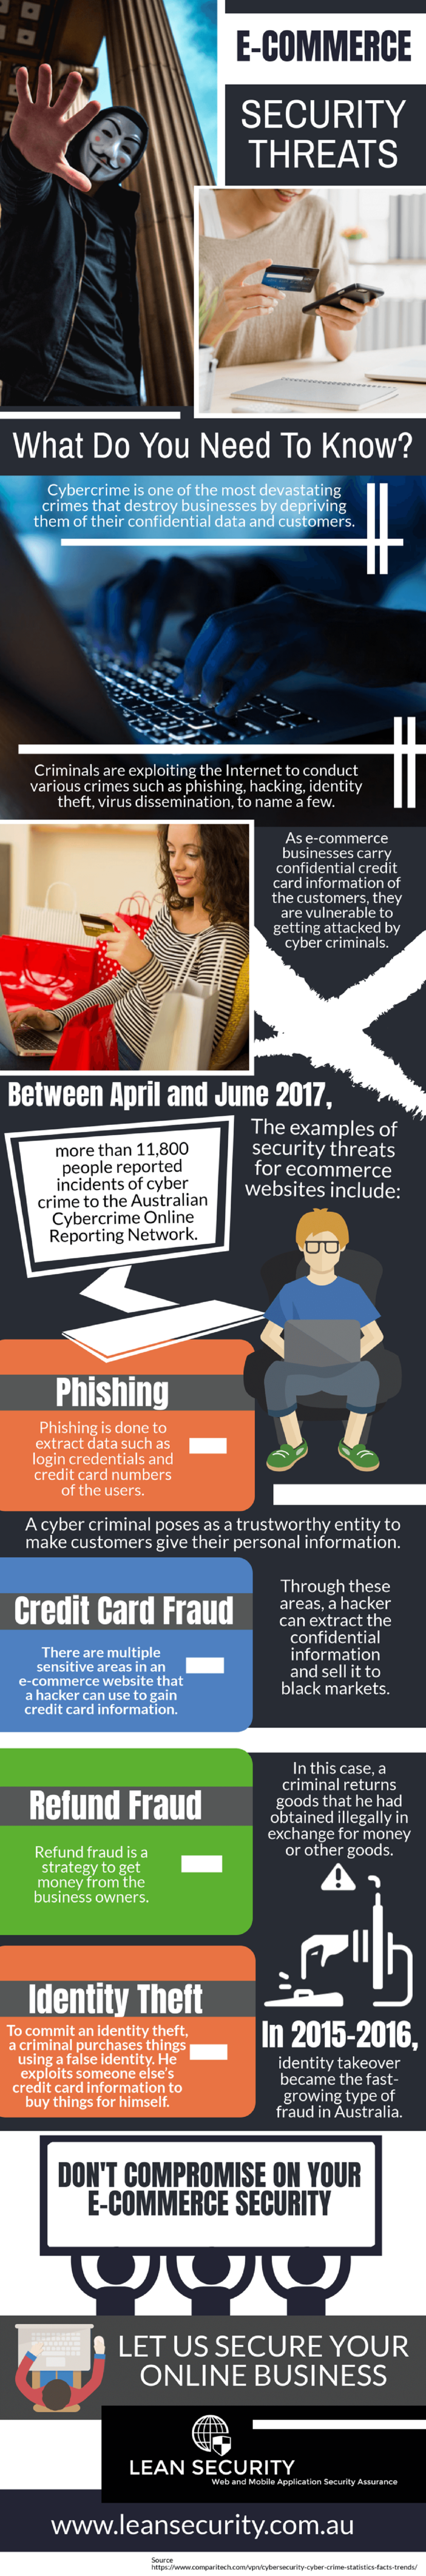 e-commerce-security-threat-what-do-you-need-to-know-infographic